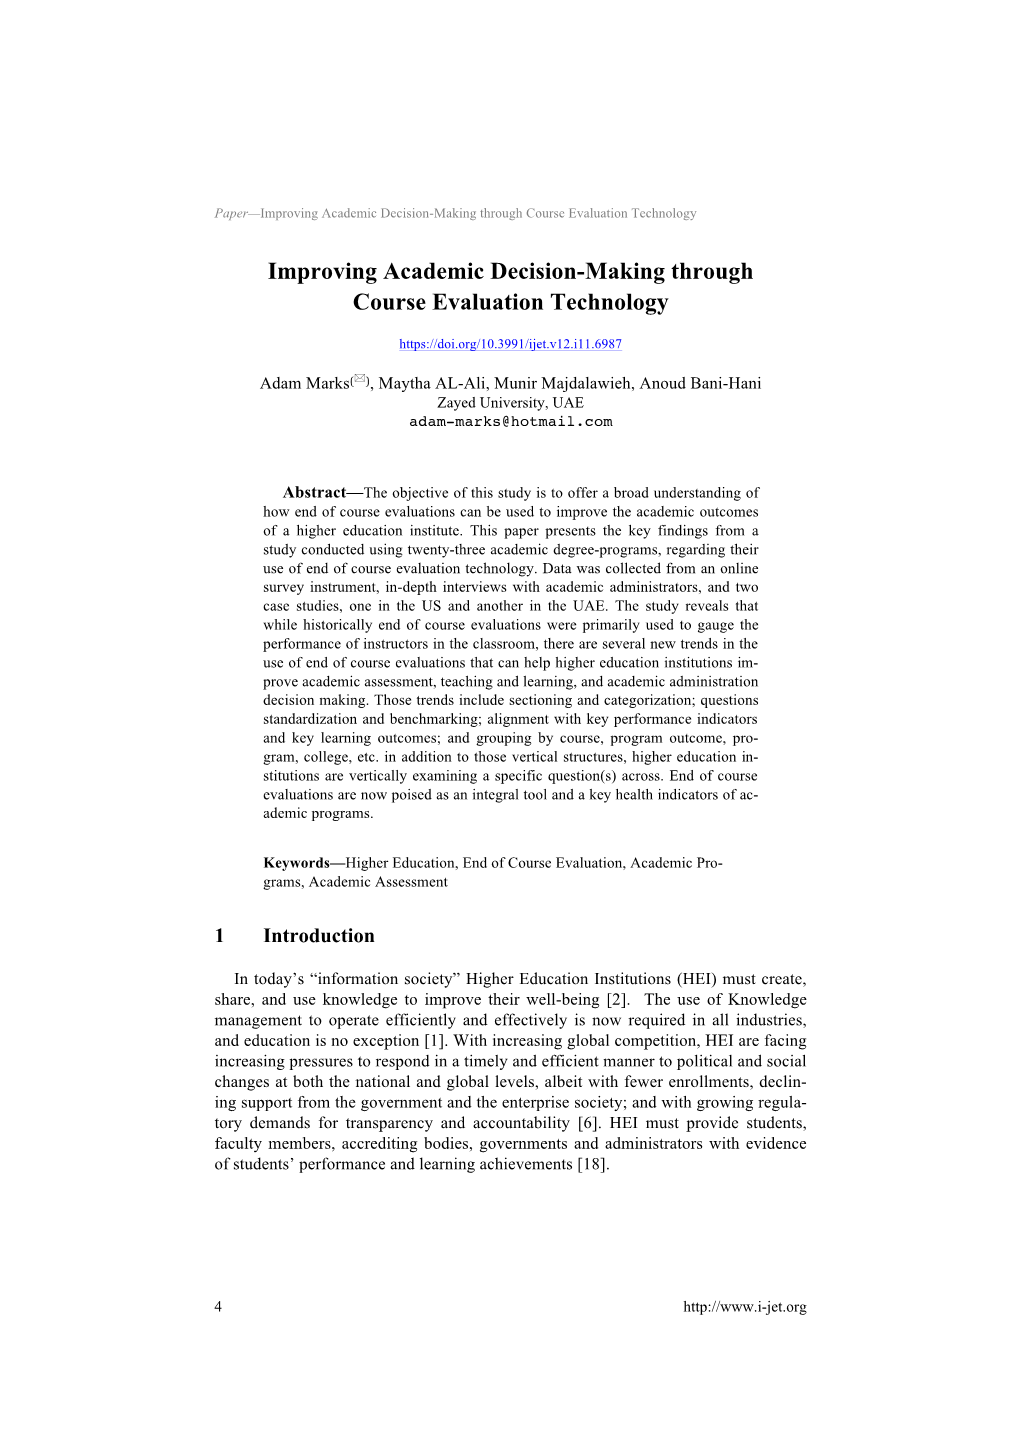 Improving Academic Decision-Making Through Course Evaluation Technology